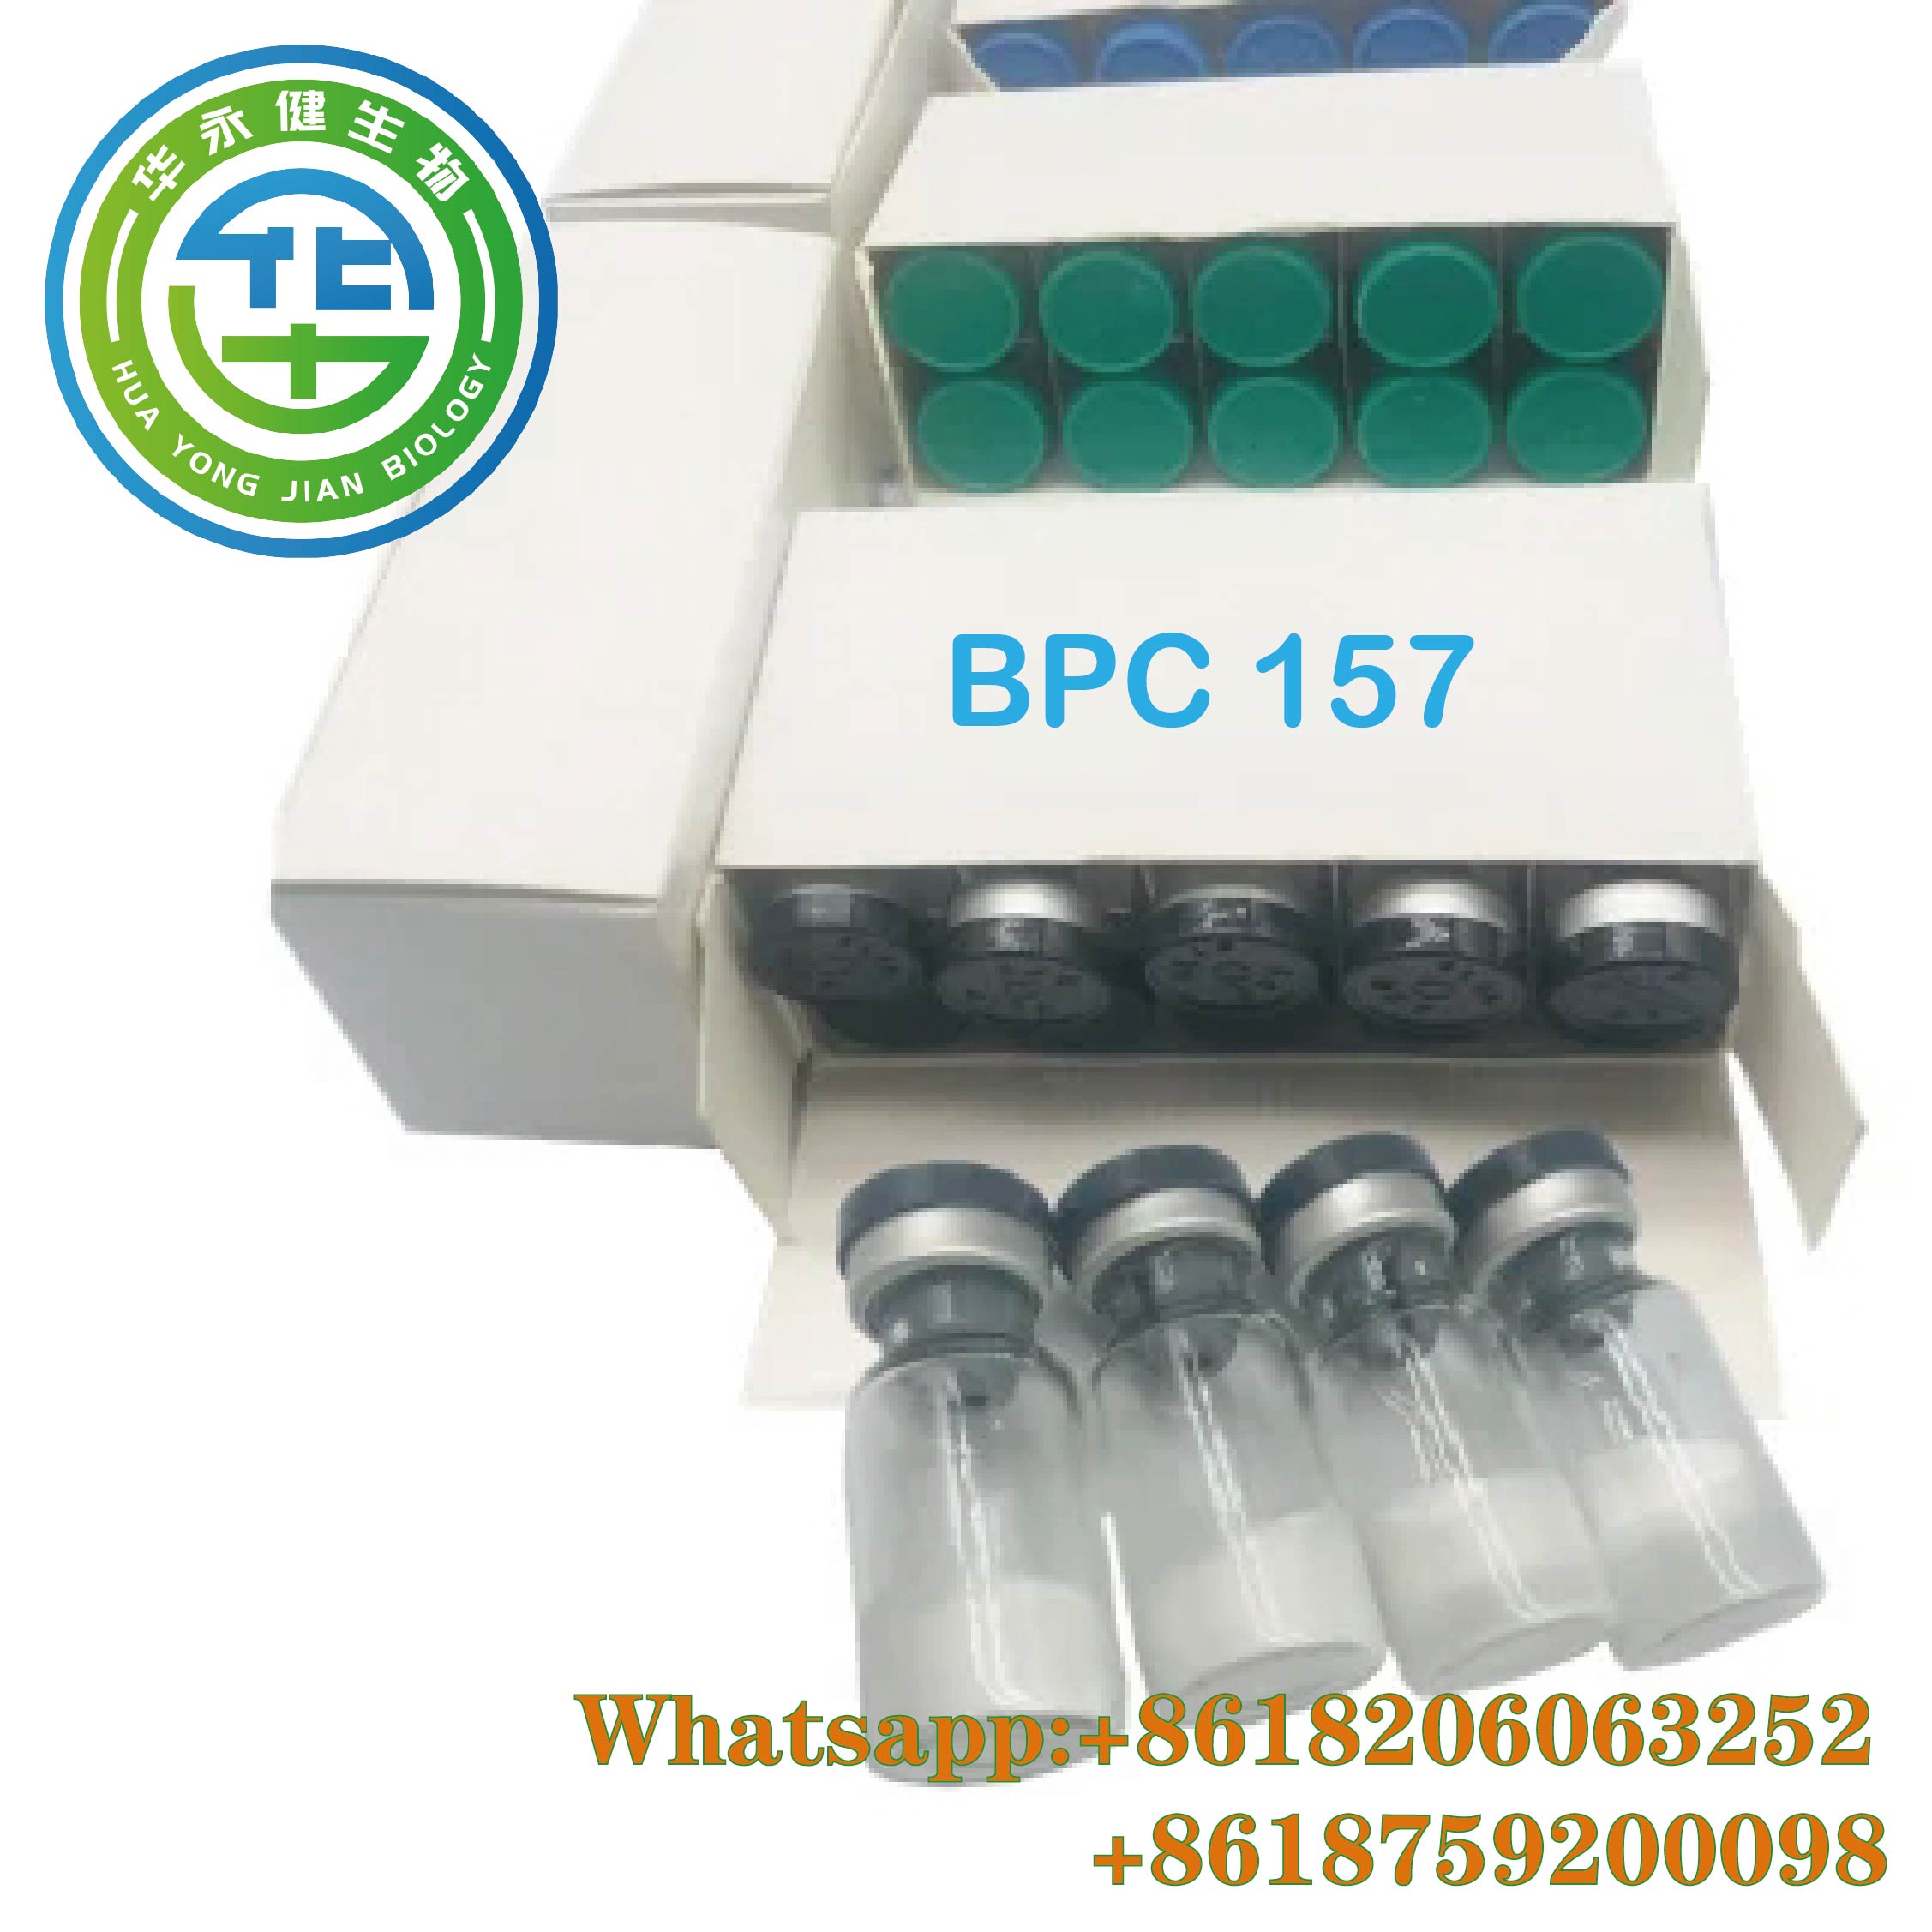 BPC157  5MG*10 VIAL Injectable Peptide Growth Hormone White Lyophilized Powder